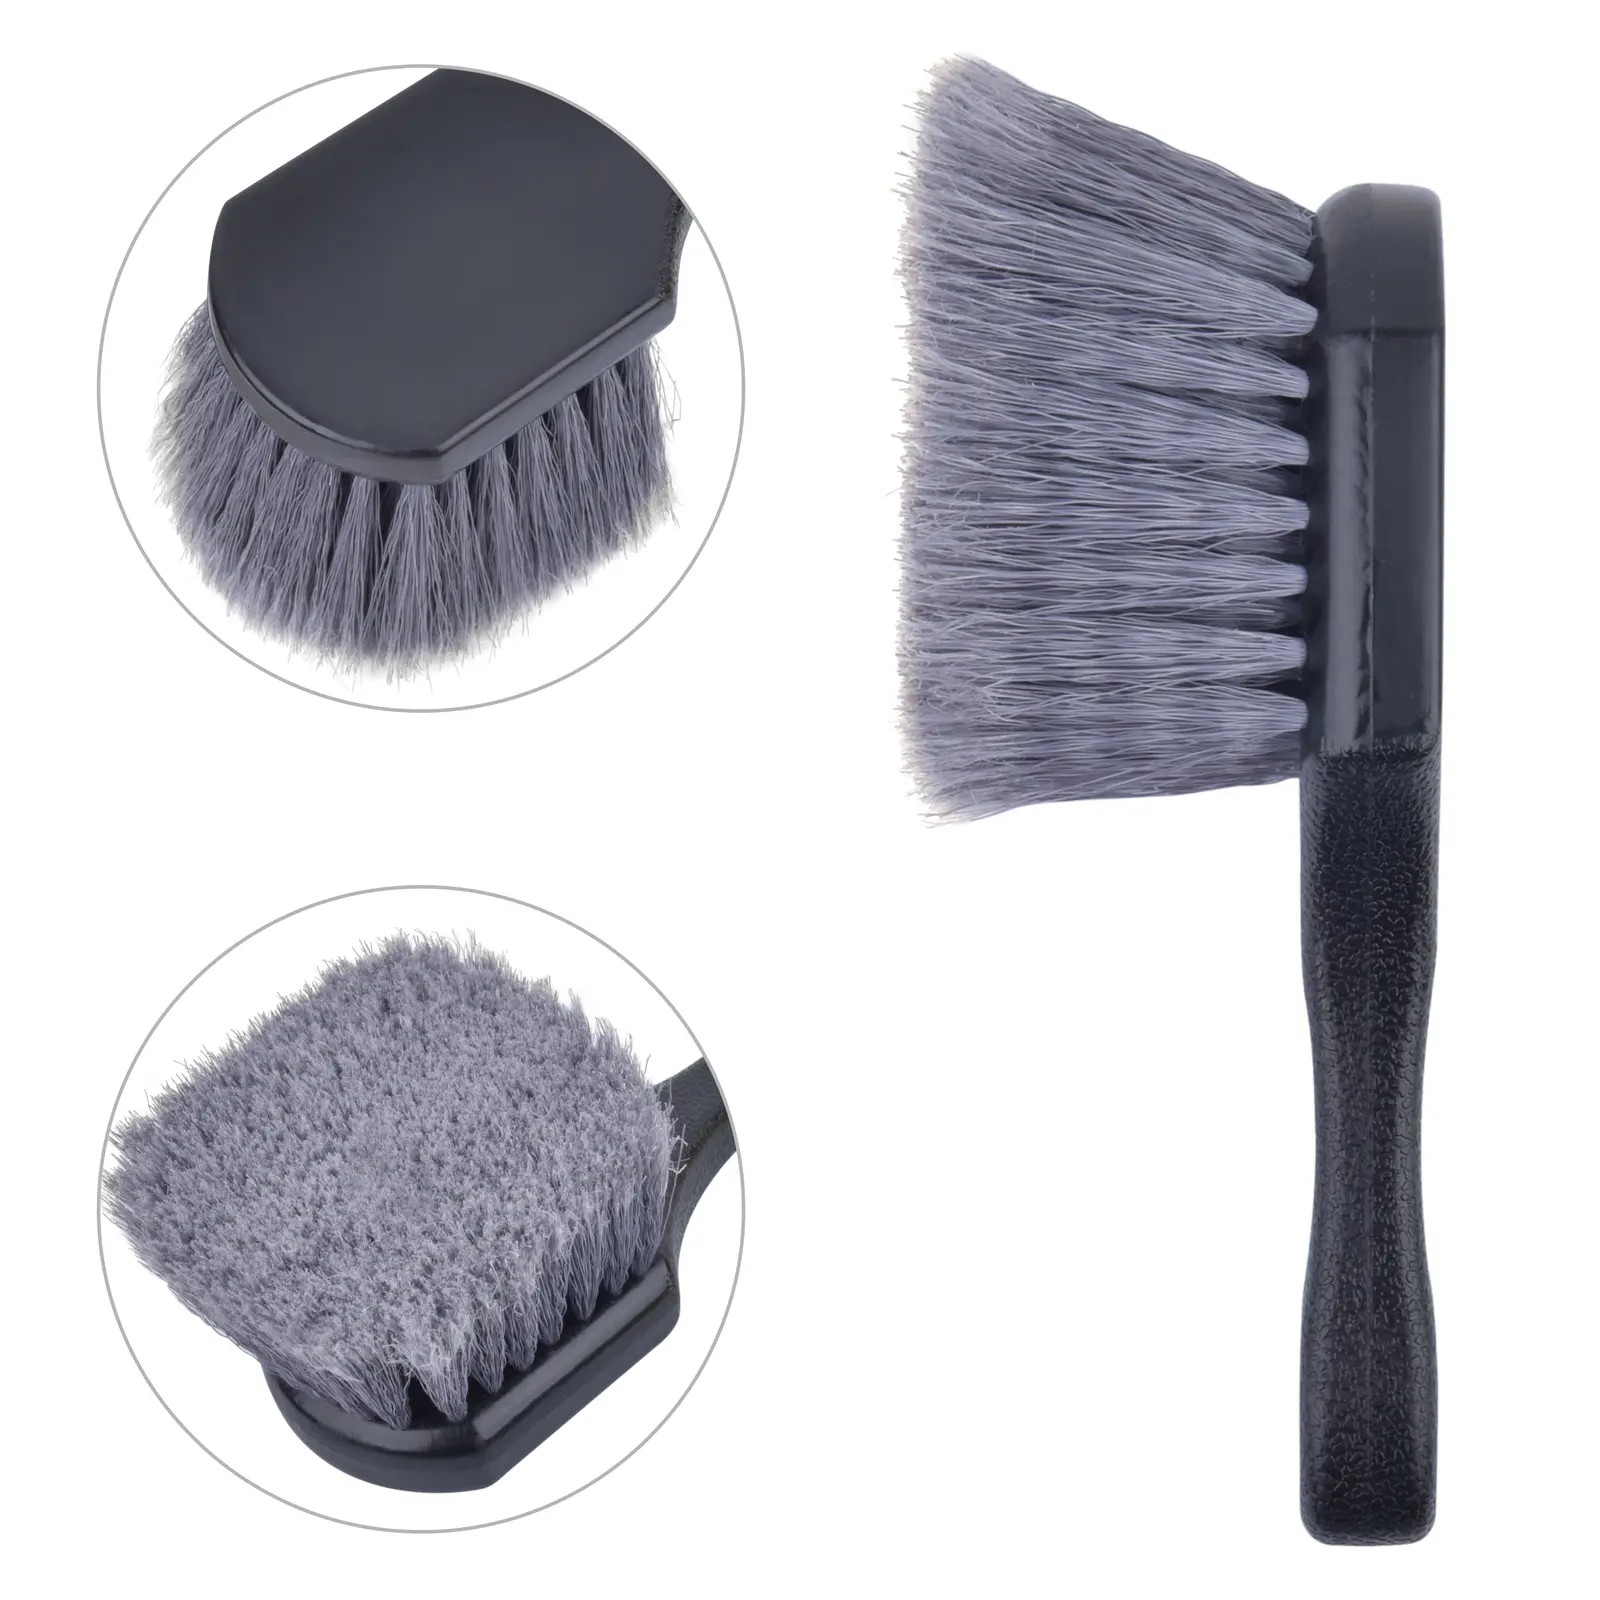 EVEAGE 12PCS Car Detailing Brush Set for Cleaning Wheels Interior